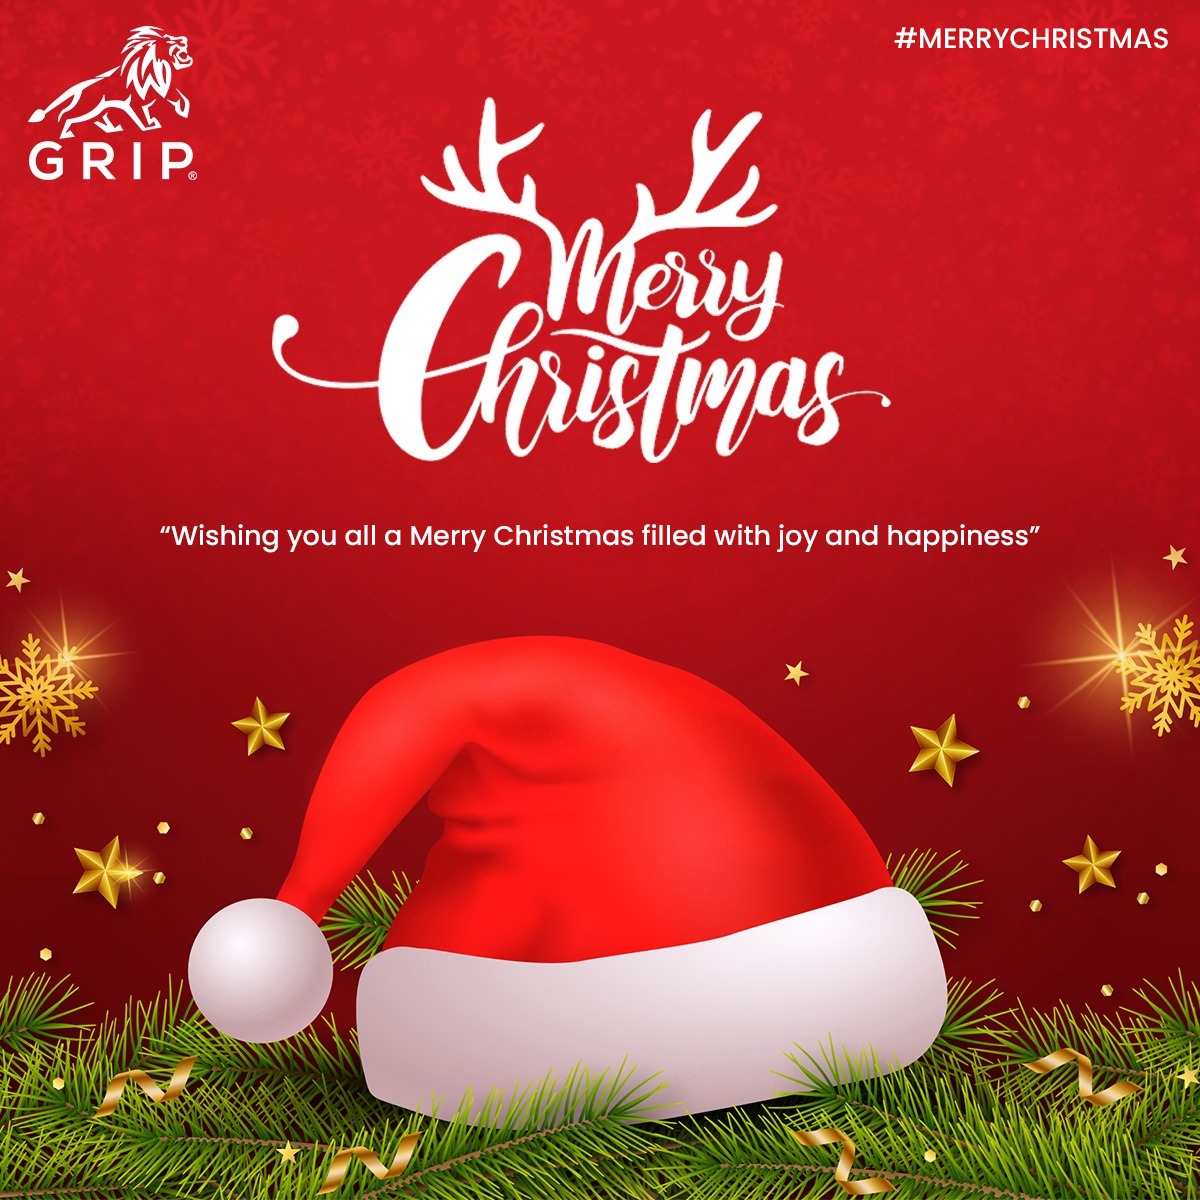 This Christmas, gear up for festive fitness with Grip Sports! 🎄🏋️ 
#GripSports #ChristmasFitnessJoy #ChristmasCheer #MindfulCelebration #MerryChristmas #Christmas #MerryChristmas2023 #HappyChristmasDay #ChristmasDay #December25 #December2023